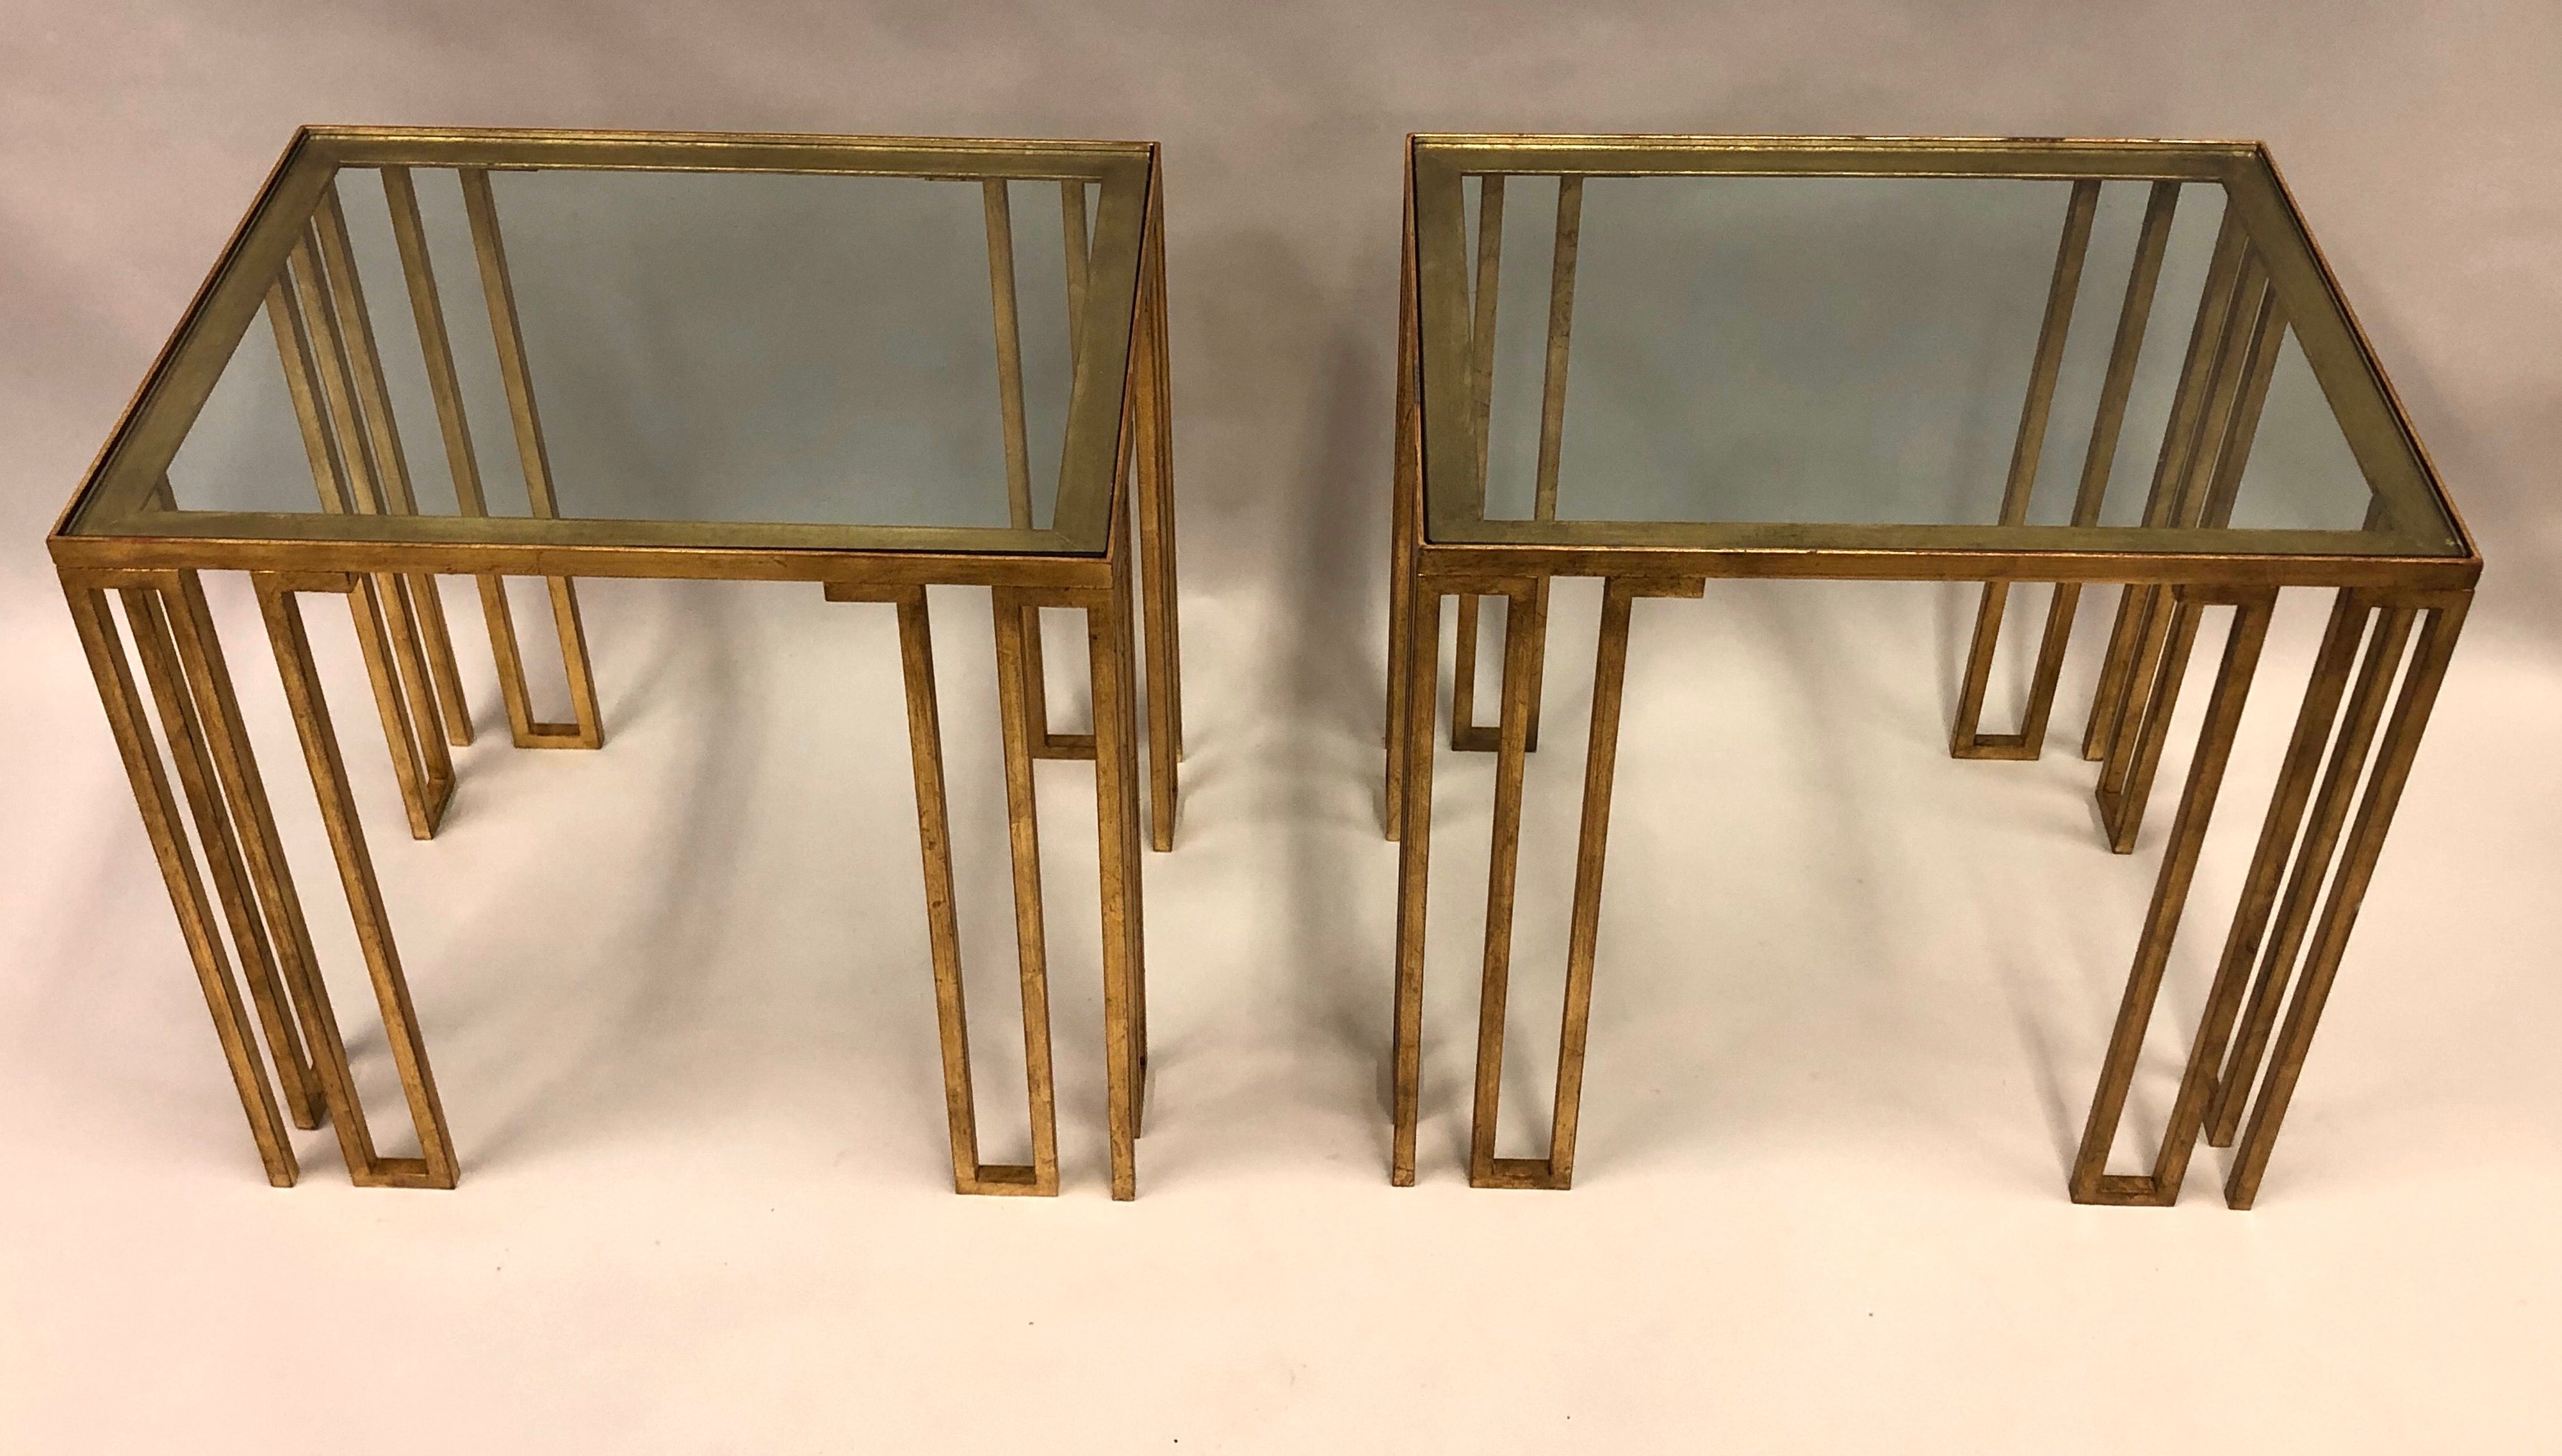 Elegant and rare pair of French Mid-Century Modern Neoclassical side or end tables in hand gilt wrought iron attributed to Jean Royère. The 'Creneaux' tables are classic, modern pieces featuring a geometric, rhythmic pattern with open, slotted